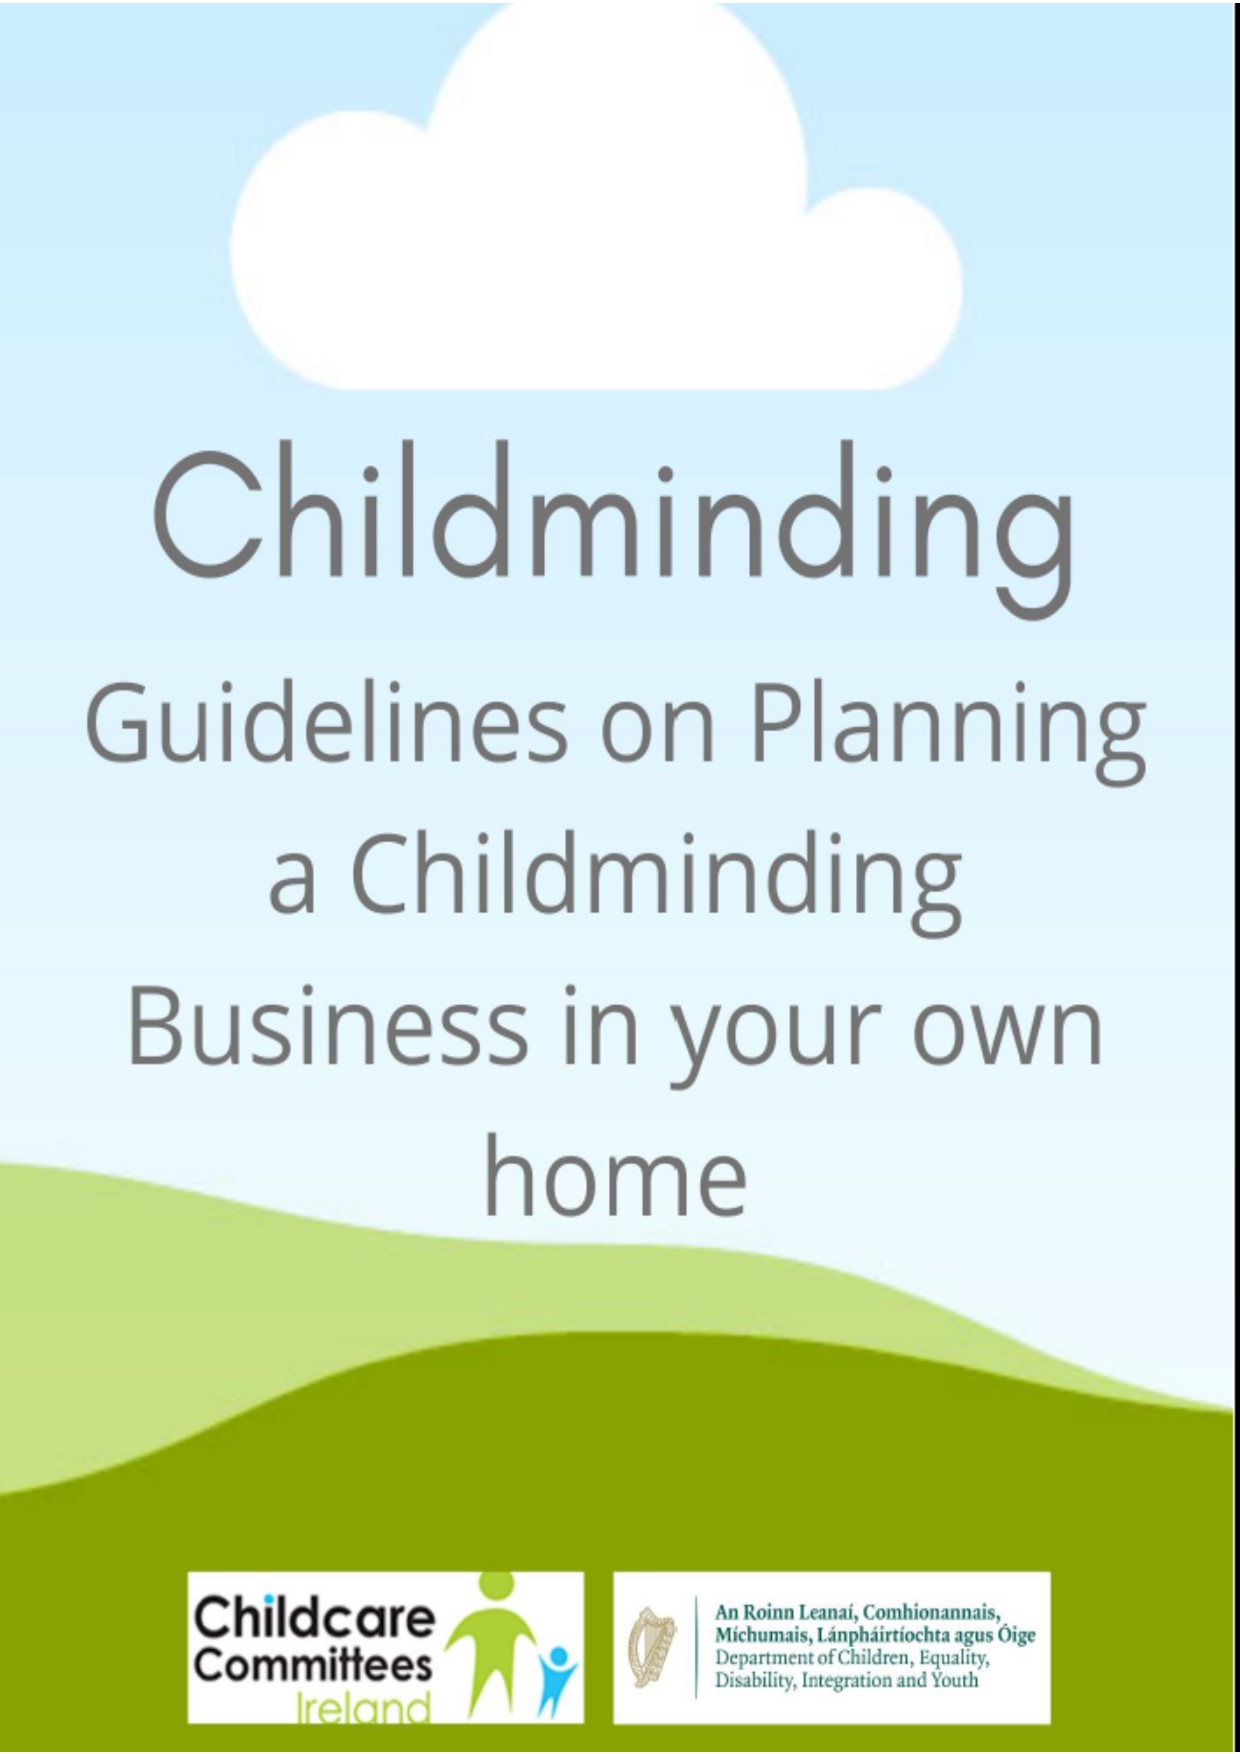 Childminding Guidelines on Planning a Childminding Business in your own home